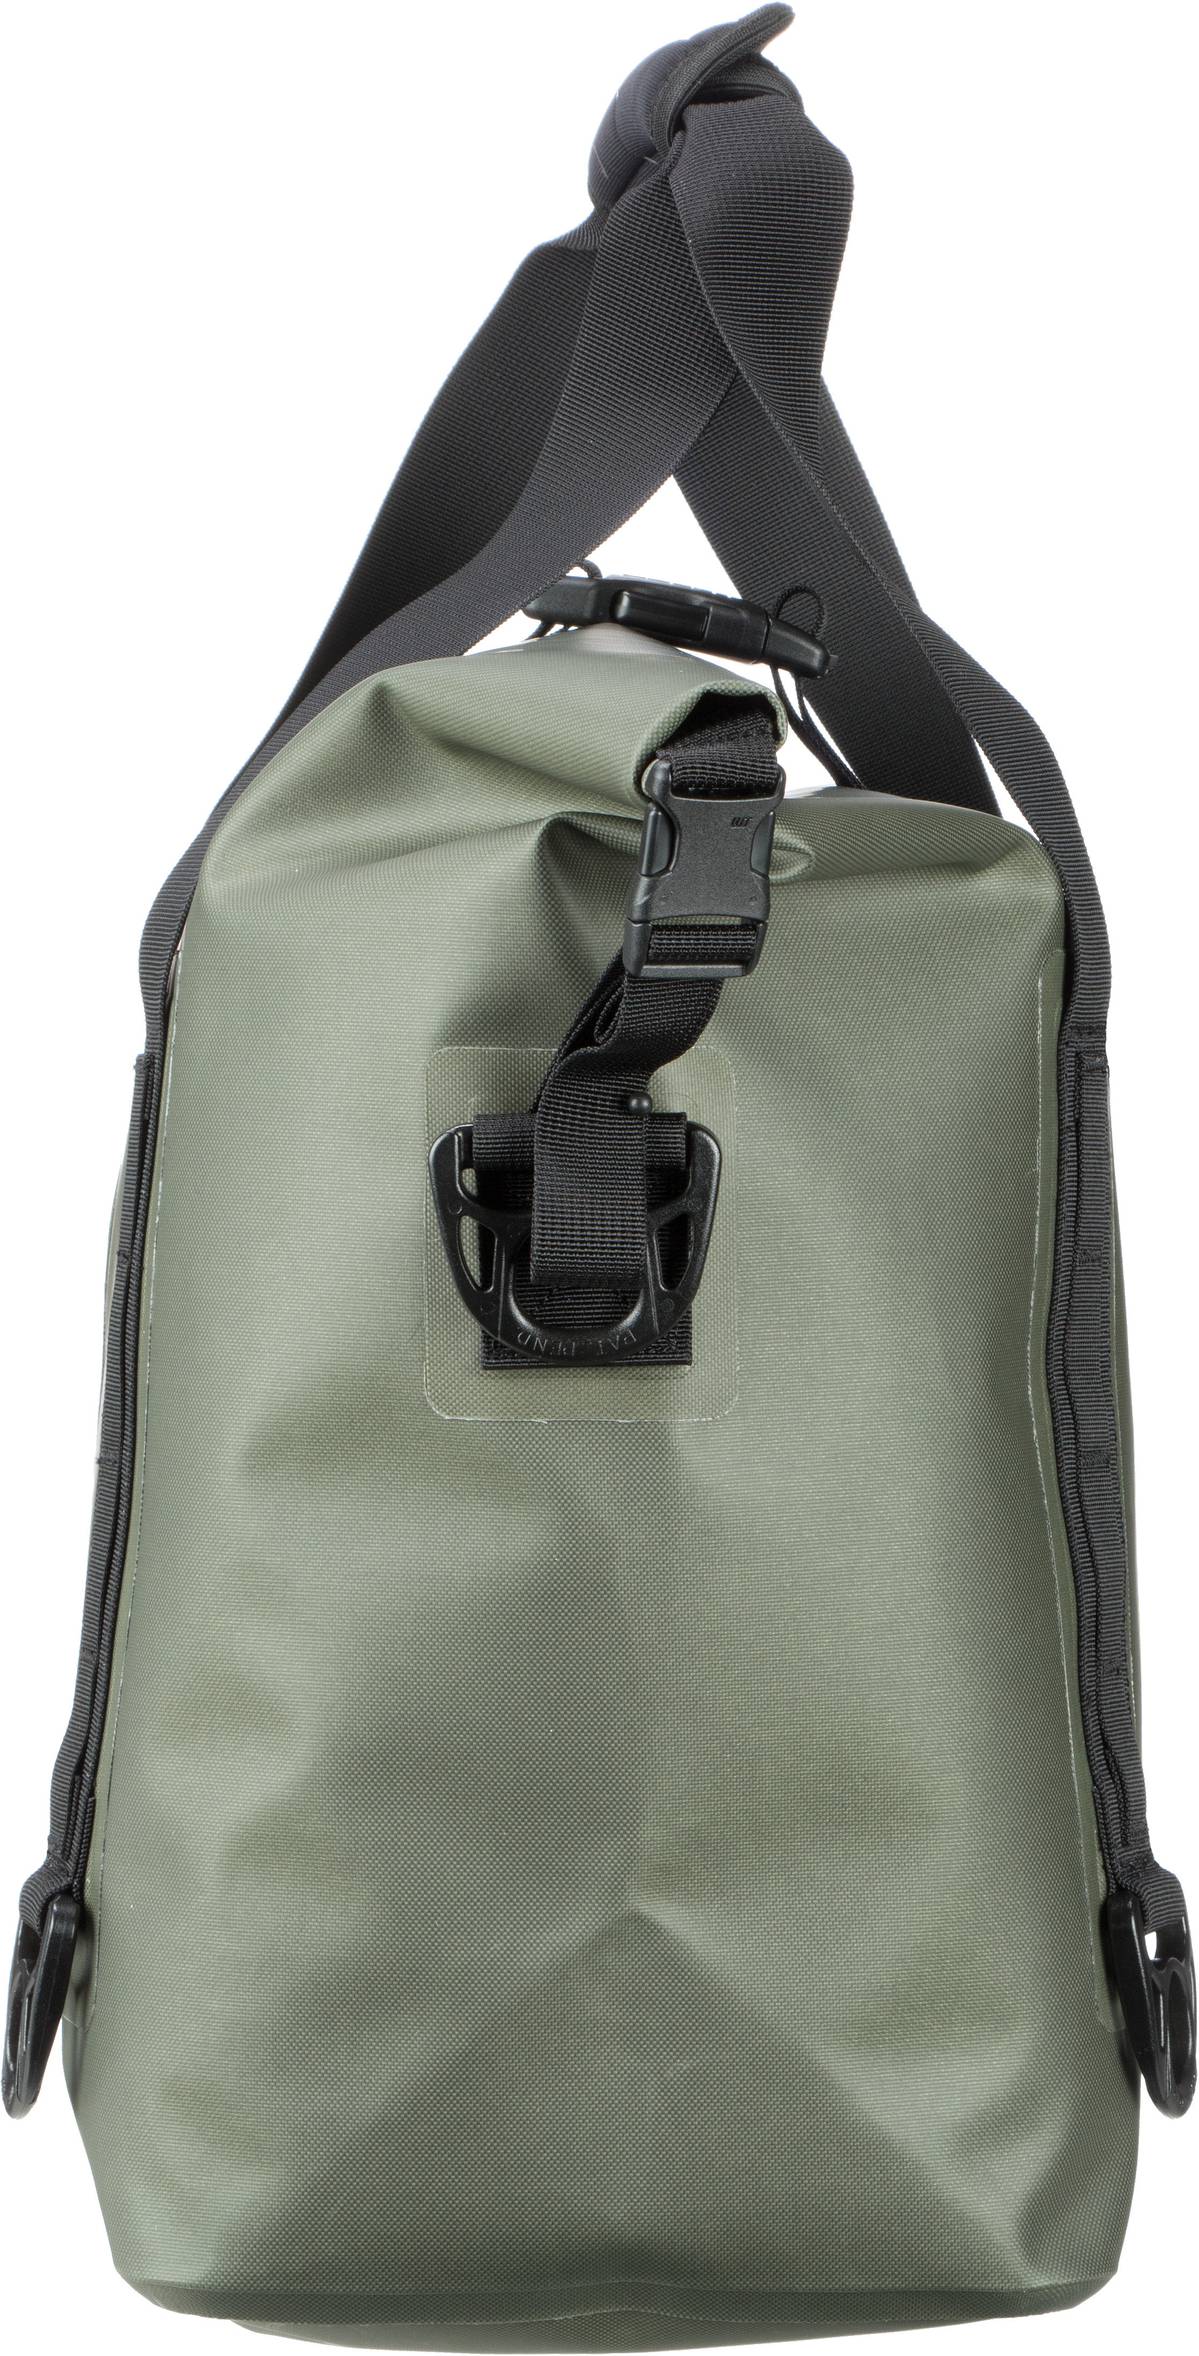 Filson Dry Roll-Top Tote Bag - Green